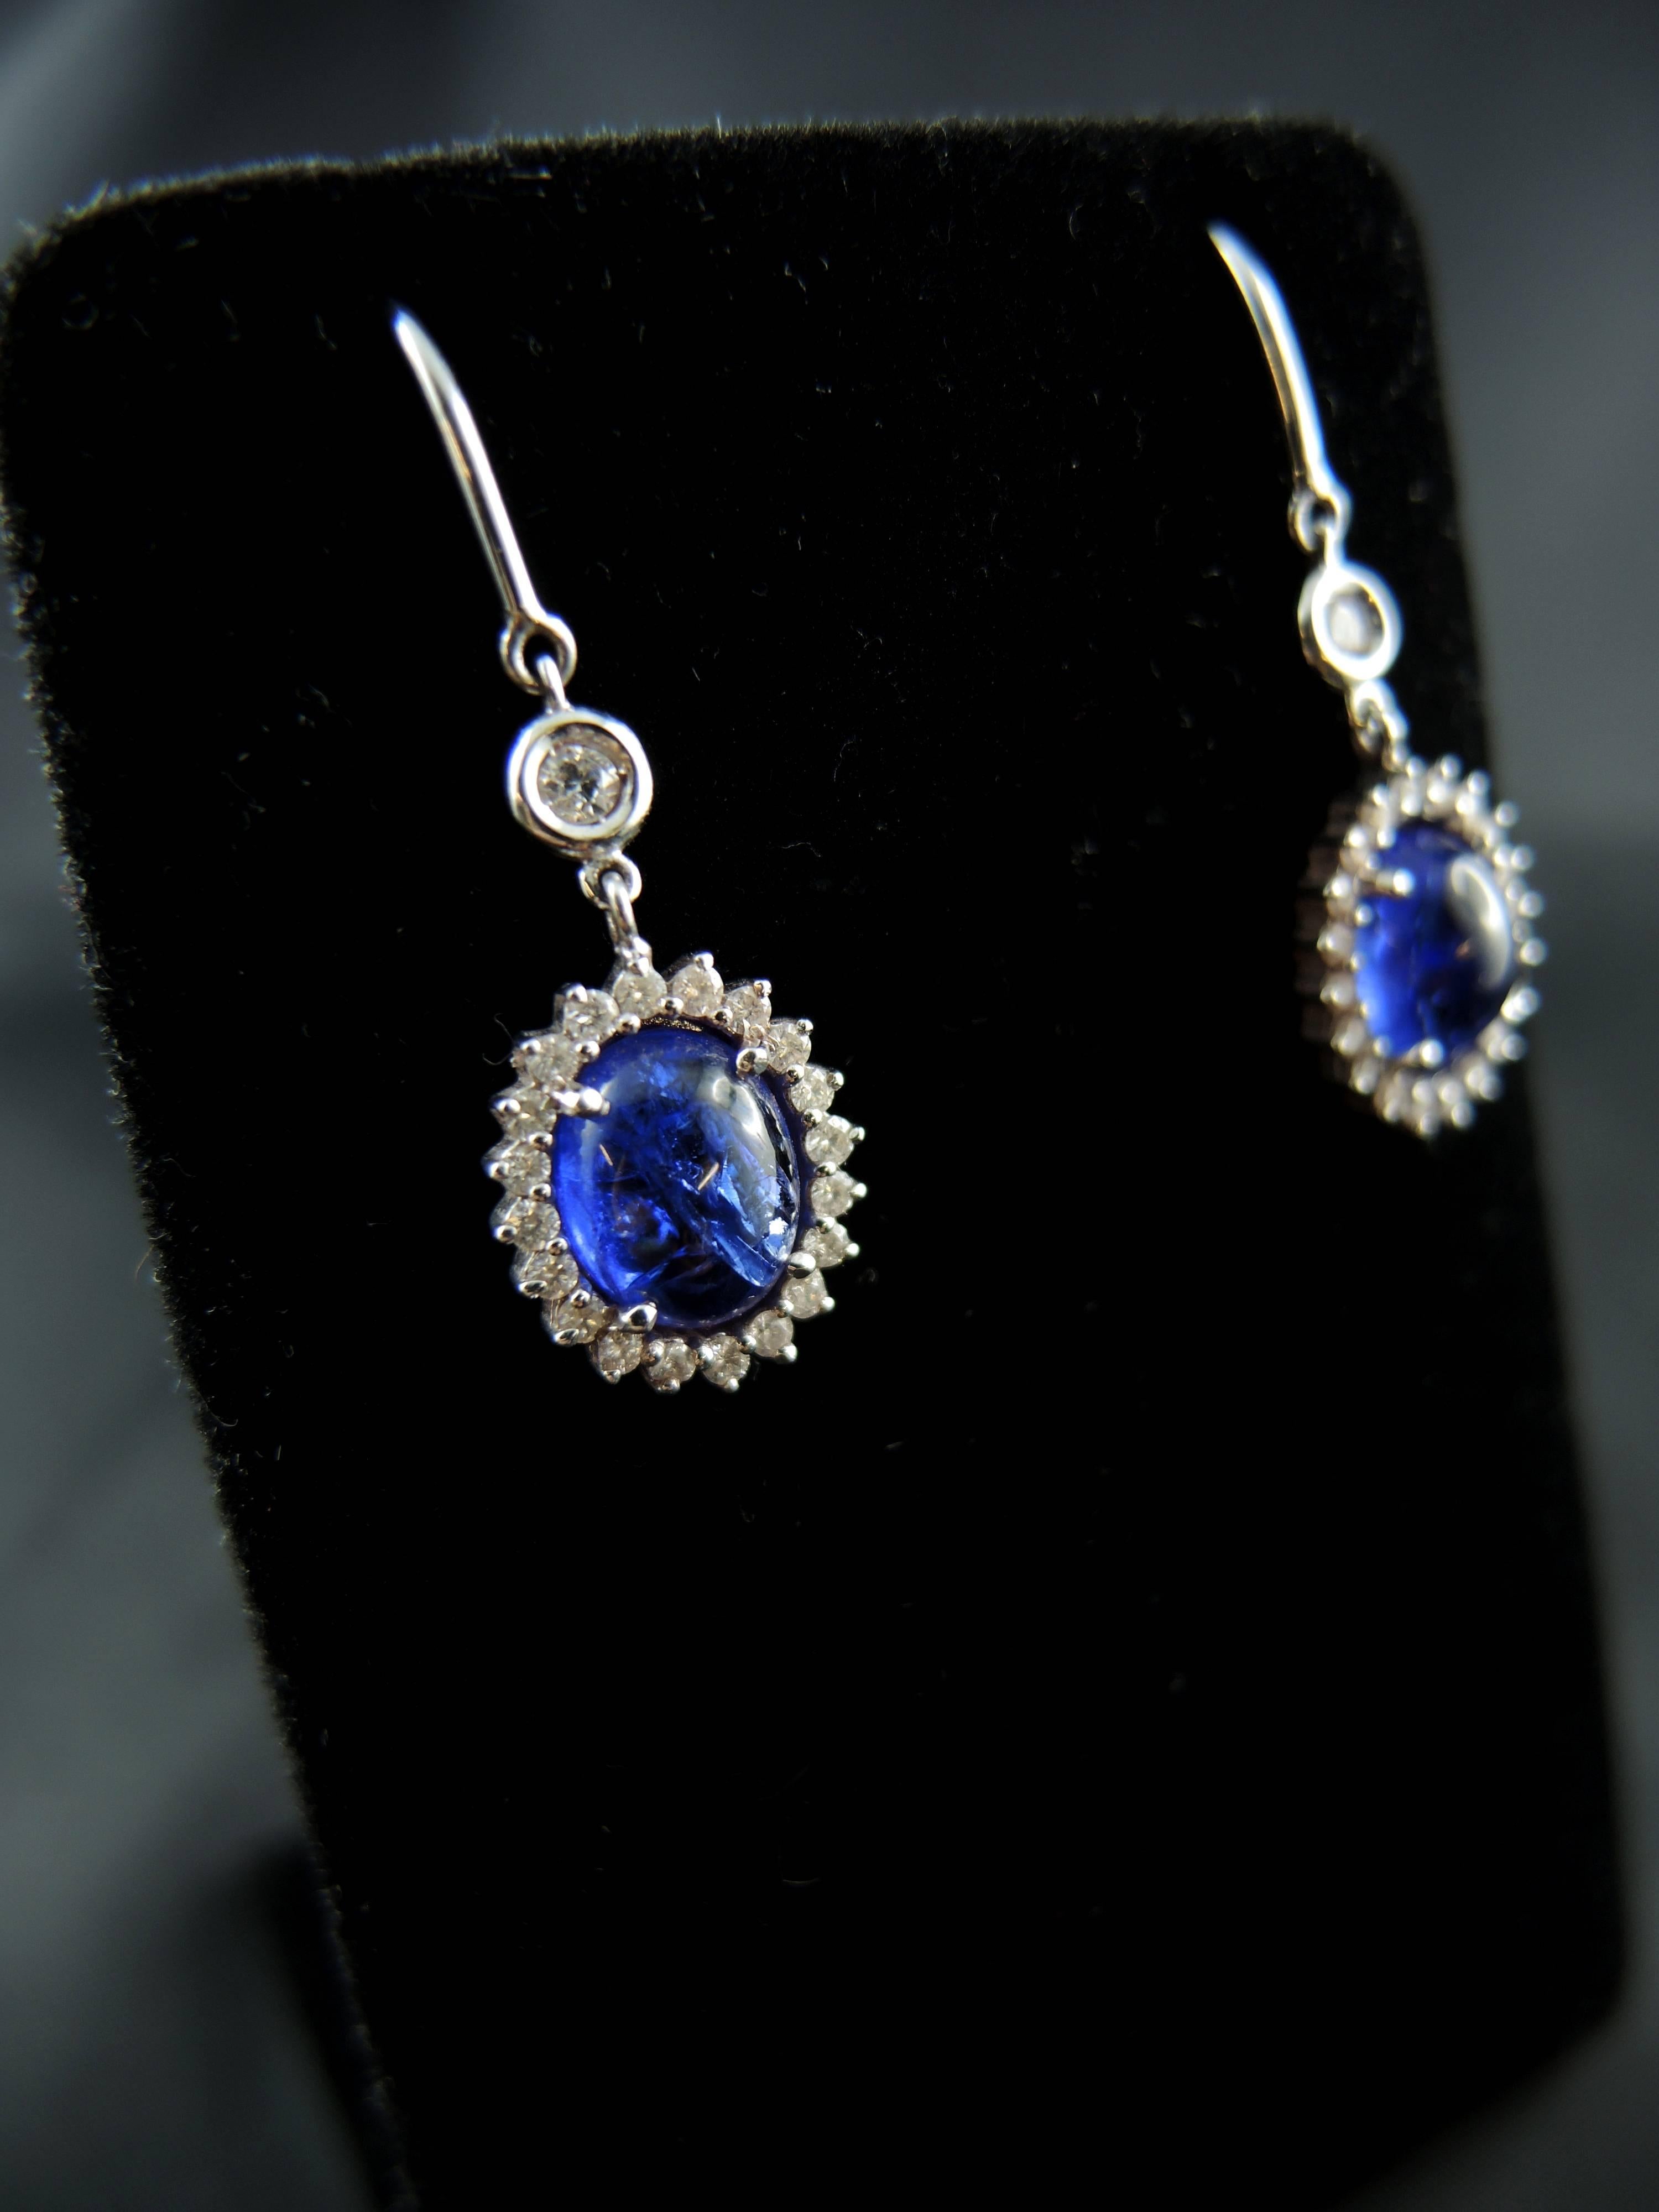 18kt white gold earrings (quality mark: eagle's head) set with stunning oval tanzanites' cabochon (total weight apx 5.45 Cts), surrounded by brillant modern cut diamonds (total weight apx 0.65 Ct).

French modern work.

Height: 3,50 cm

Weight: 5,20